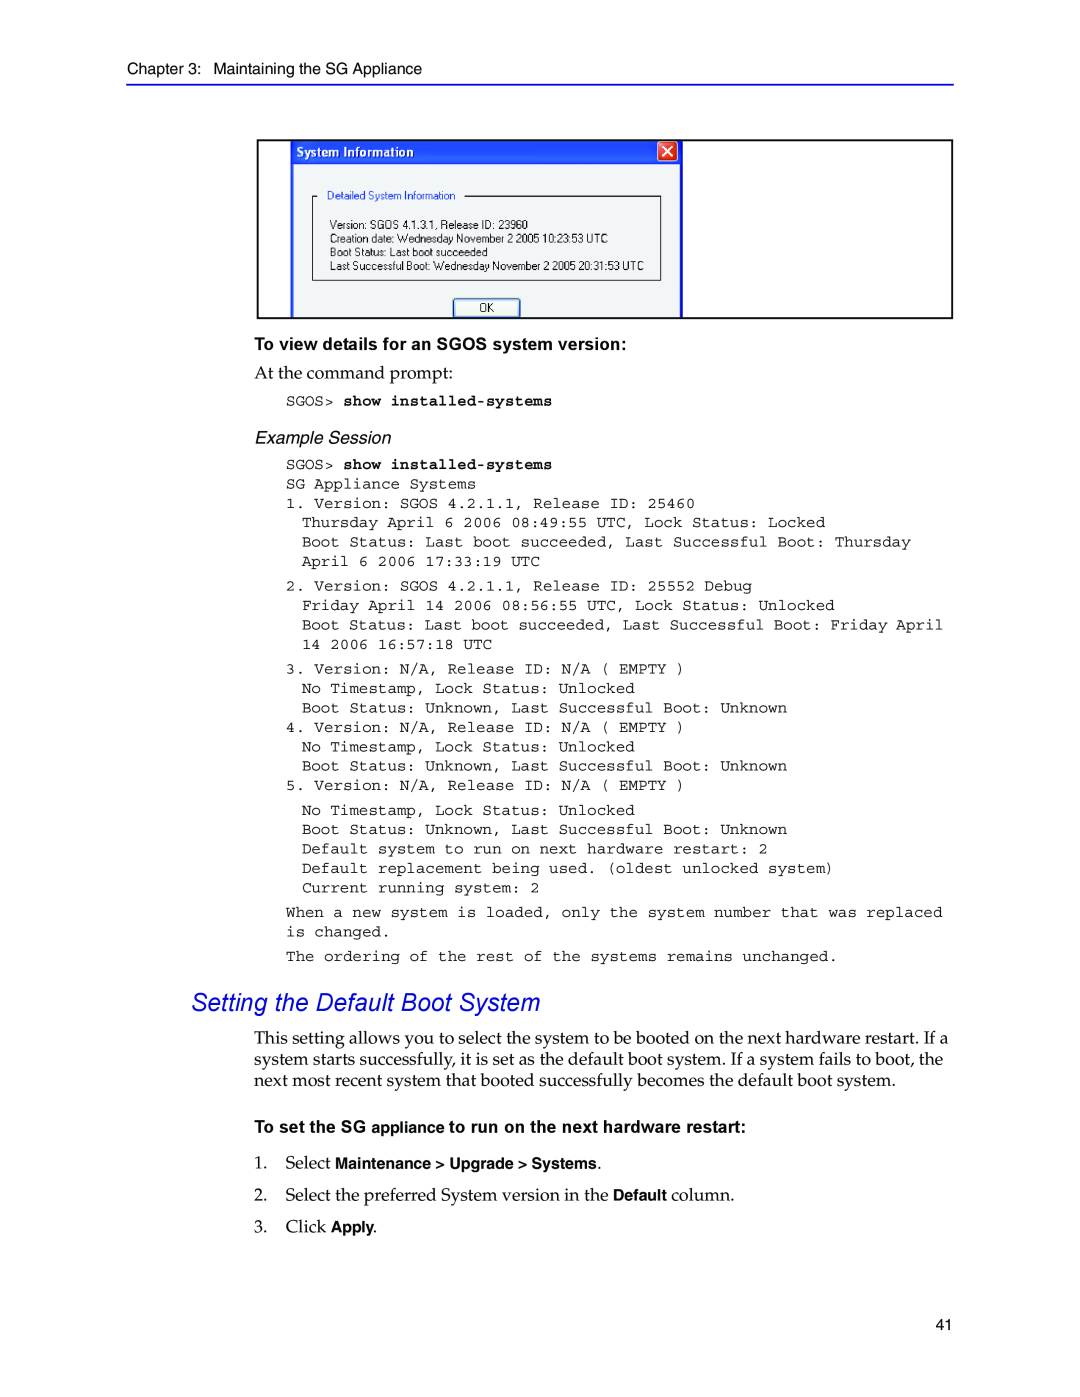 Blue Coat Systems Blue Coat Systems SG Appliance, SGOS Version 5.2.2 manual Setting the Default Boot System, Example Session 